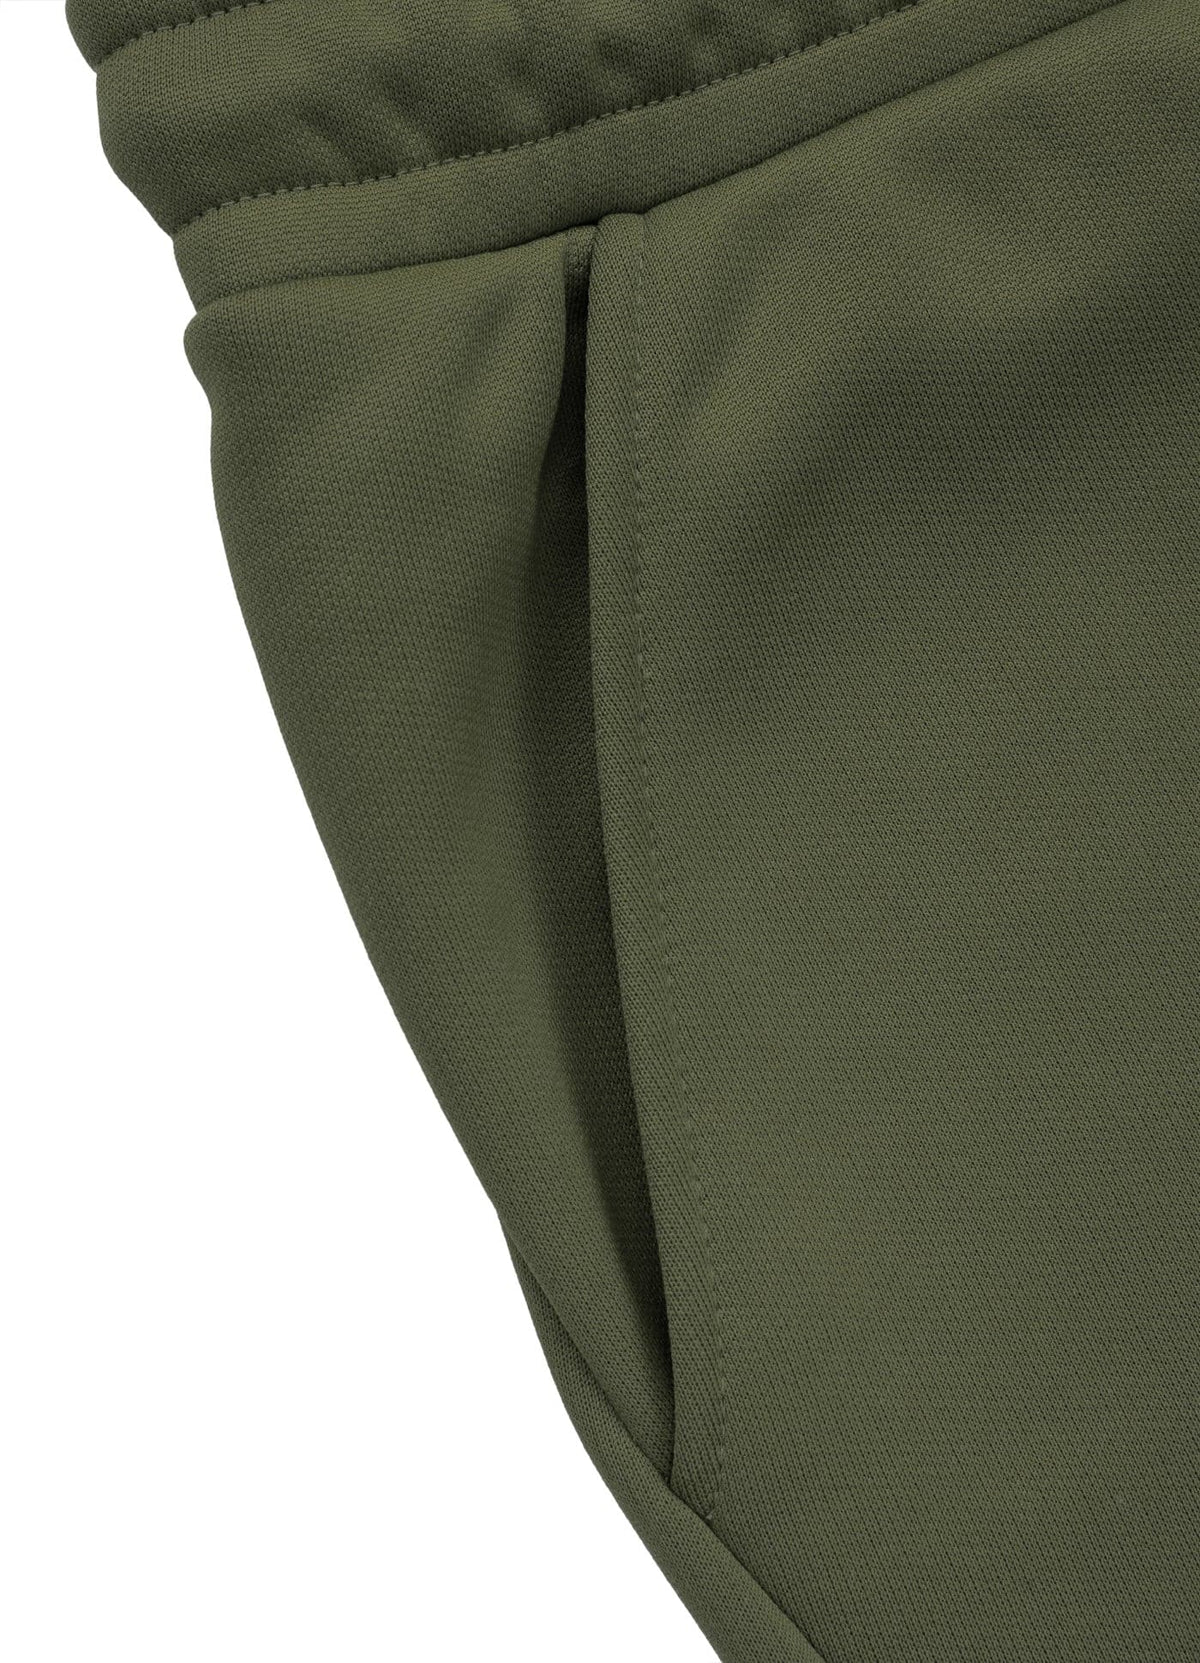 OLD SCHOOL SMALL LOGO Olive Track Pants.